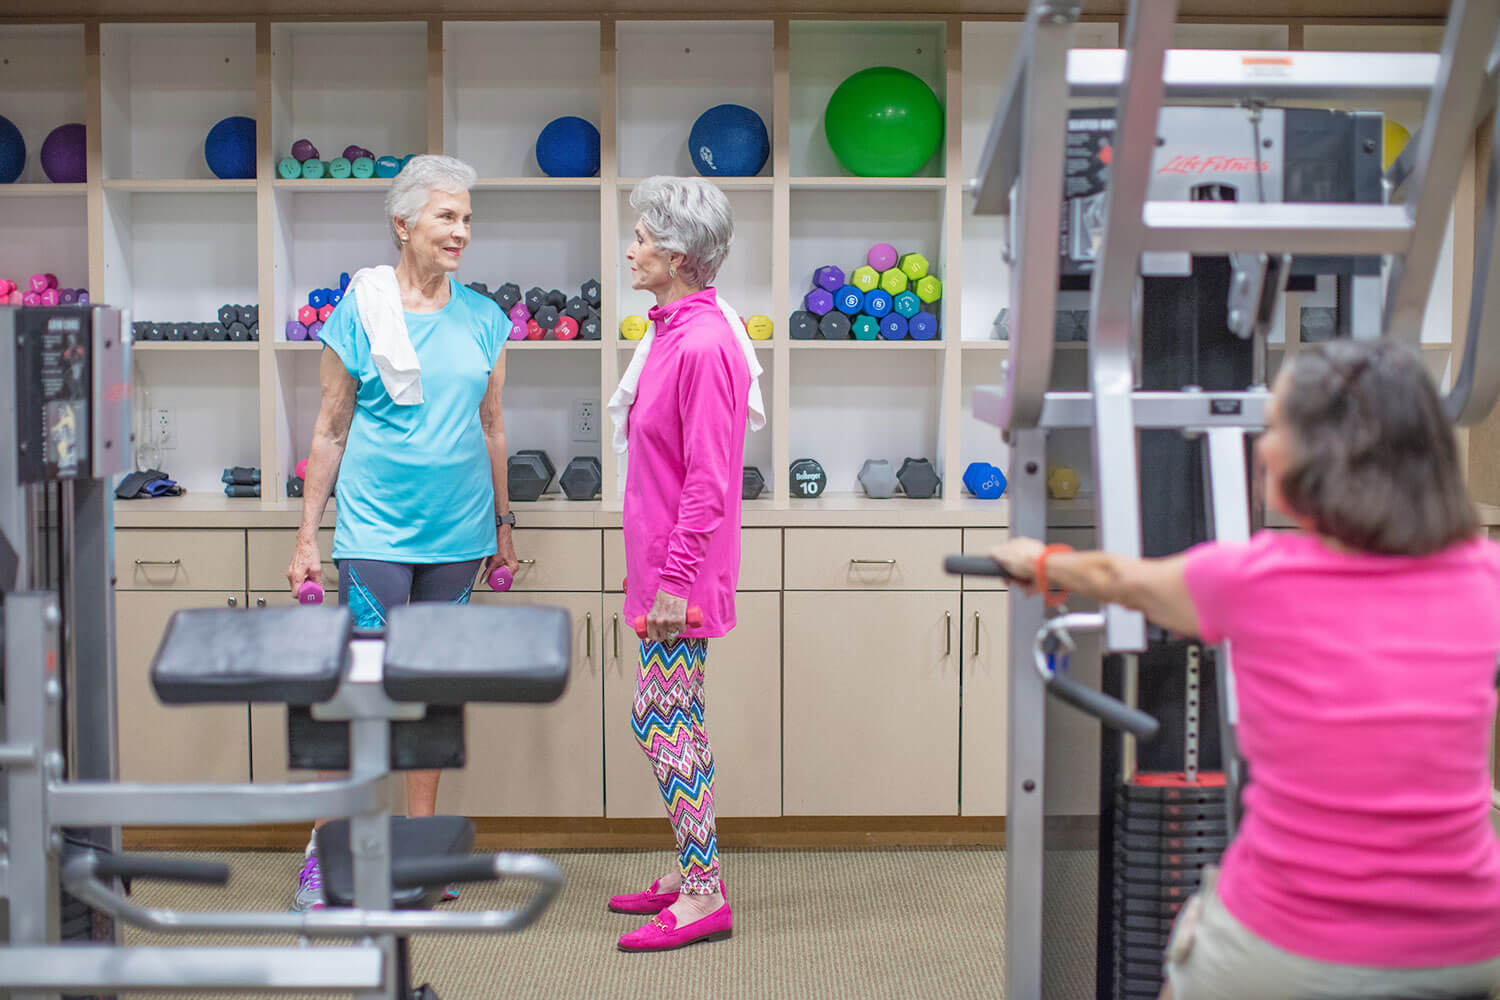 Senior women standing together in a fitness center dressed in workout clothing & holding small weights